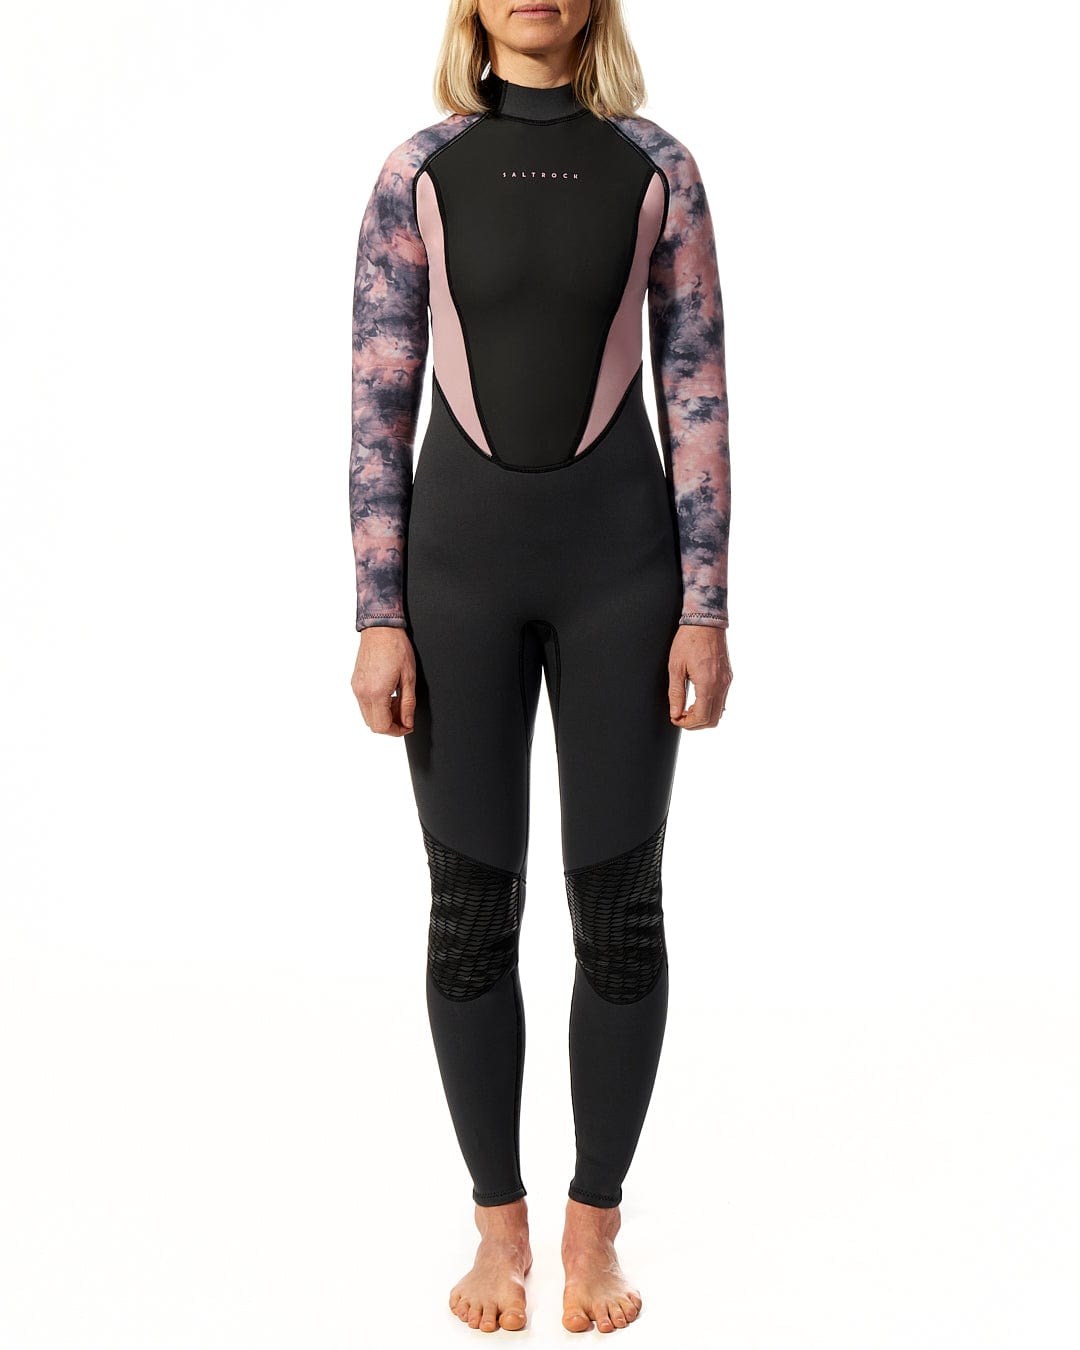 A woman wearing a Saltrock Vision - Womens 3/2 Back Zip Wetsuit - Light Pink standing on a white background.